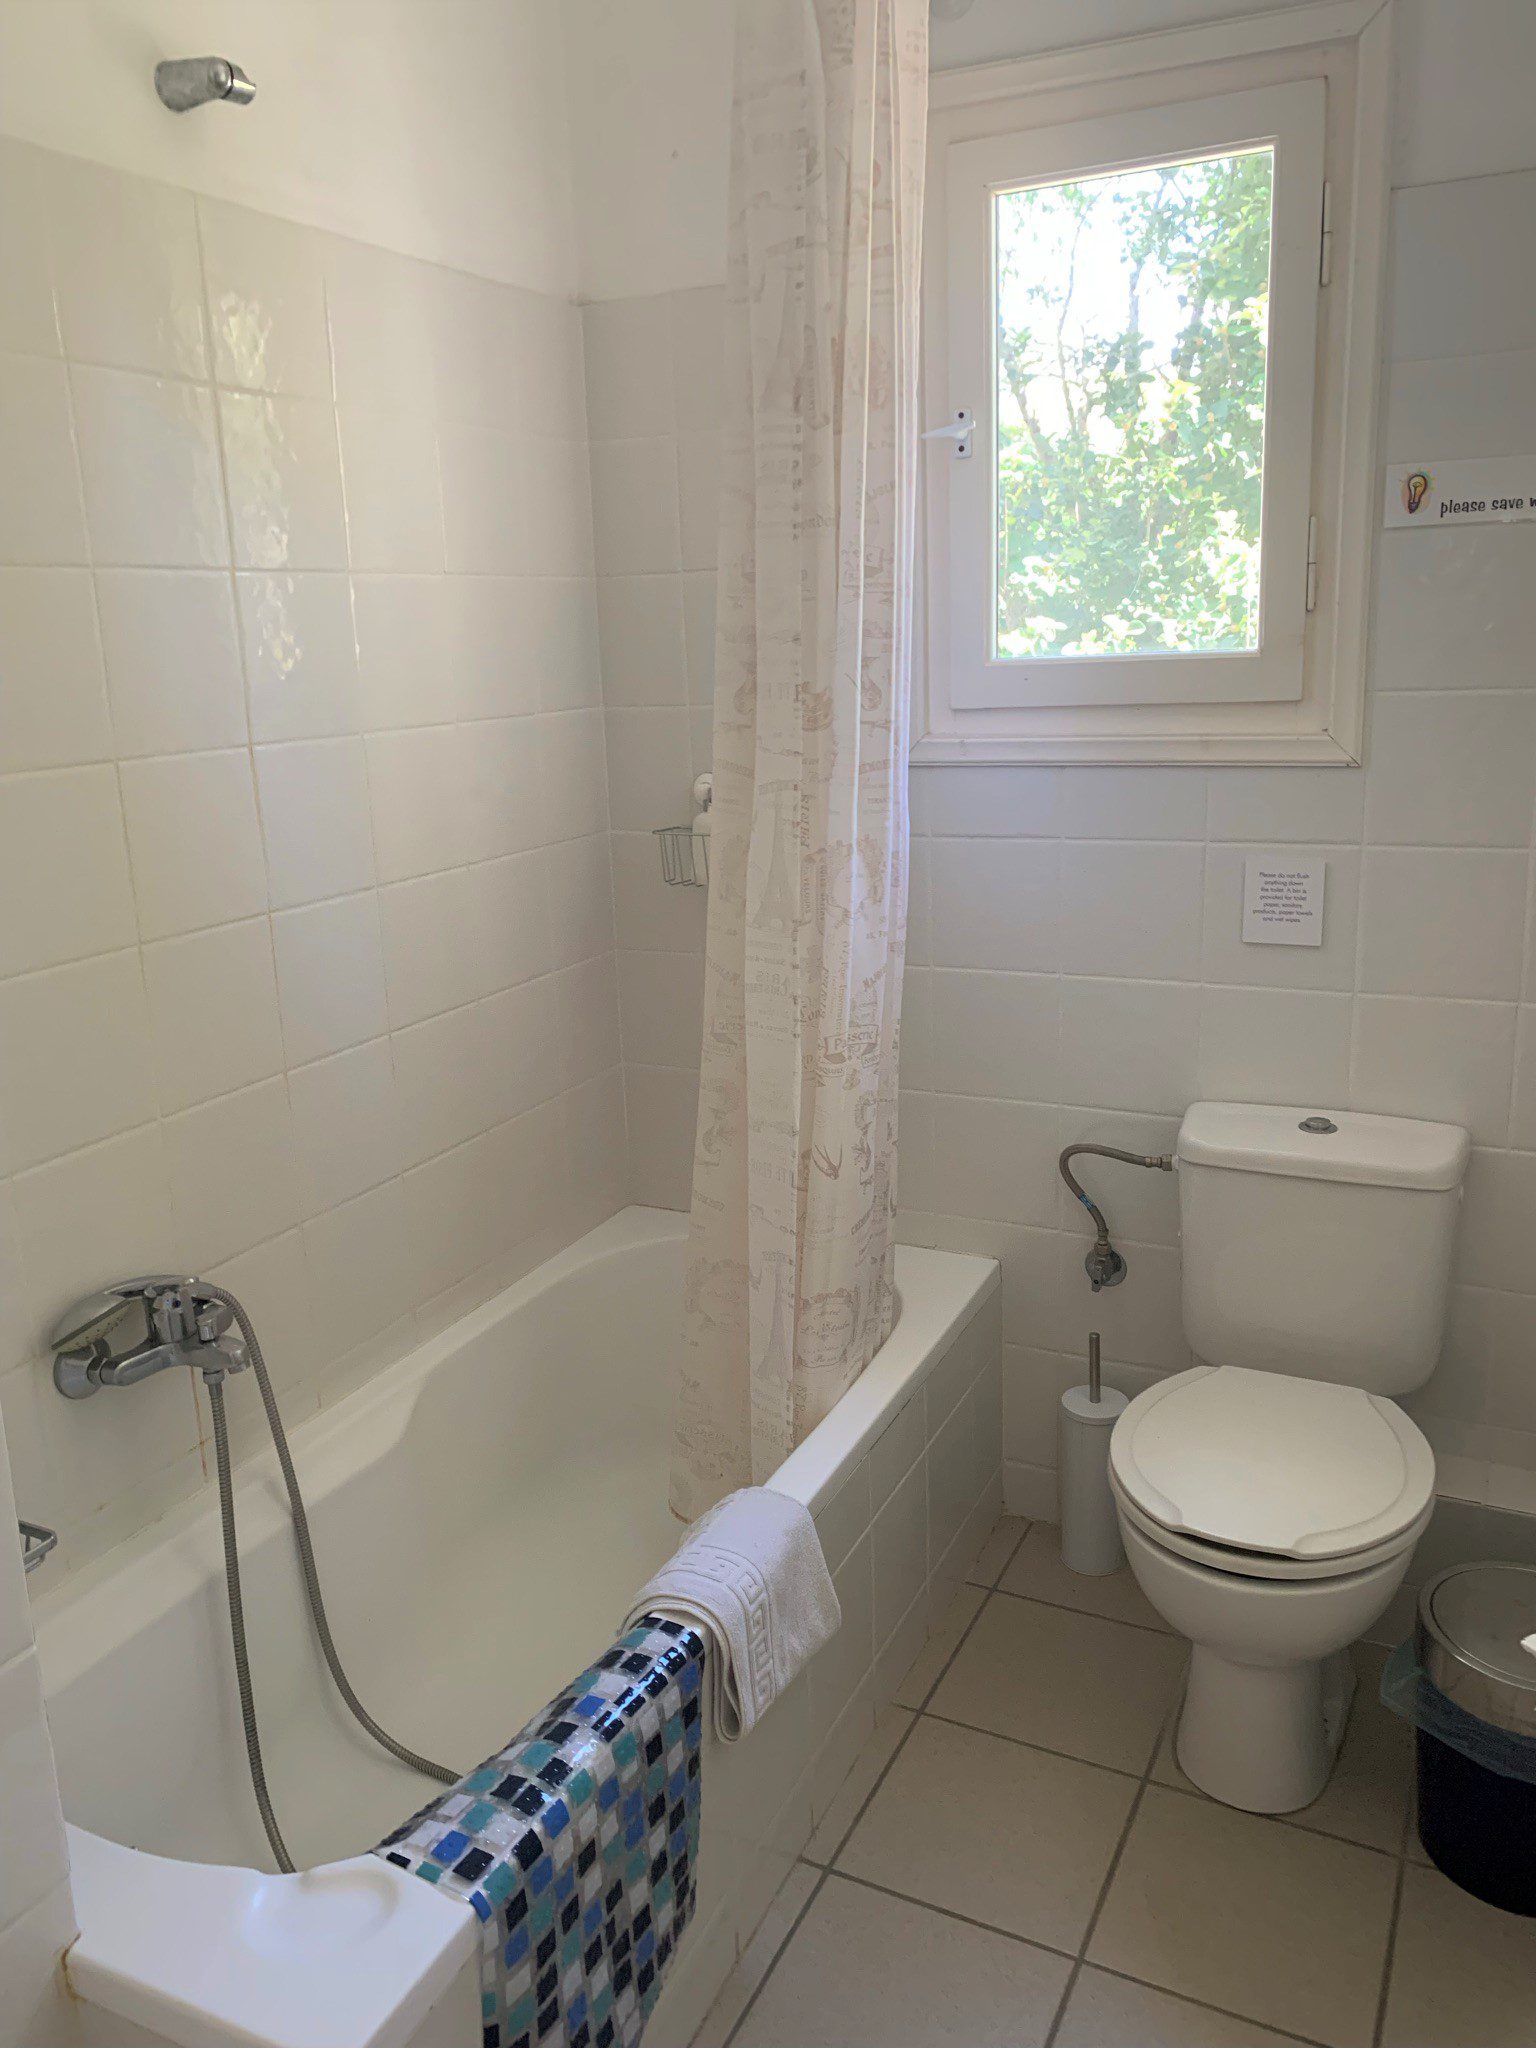 Bathroom of house for rent in Ithaca Greece Stavros